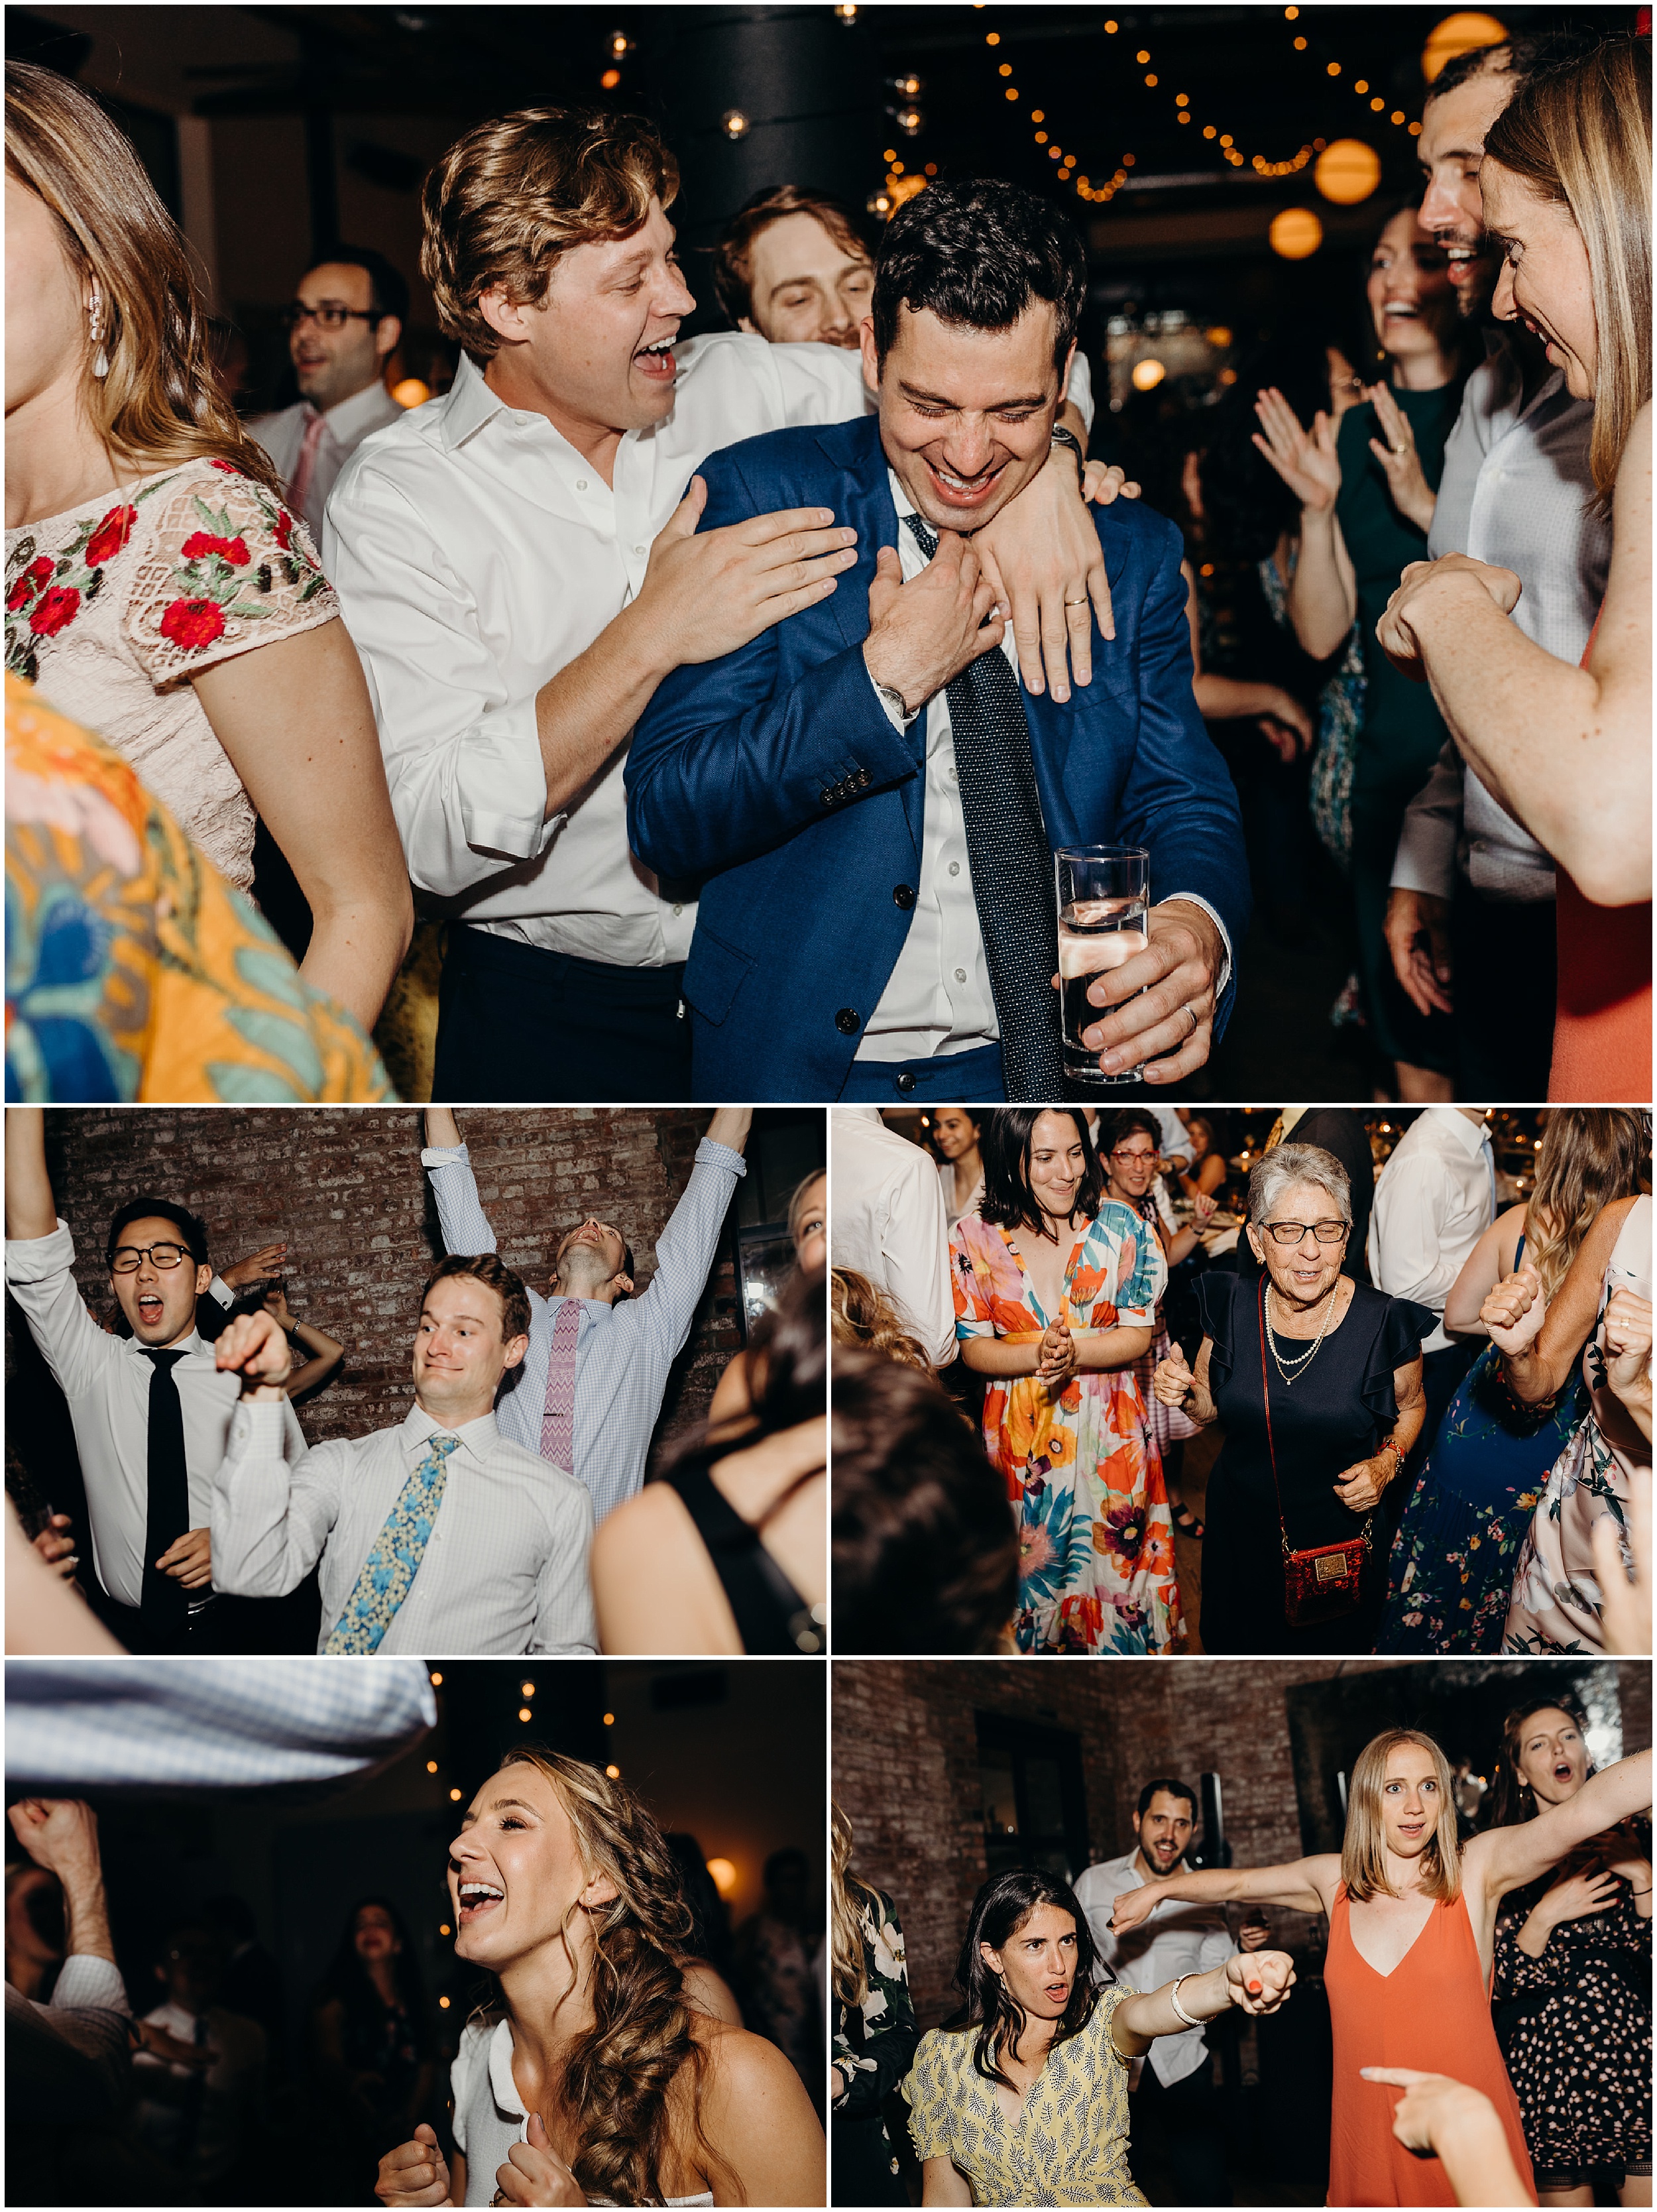 guests dance at a wedding reception at the wythe hotel in brooklyn, new york city